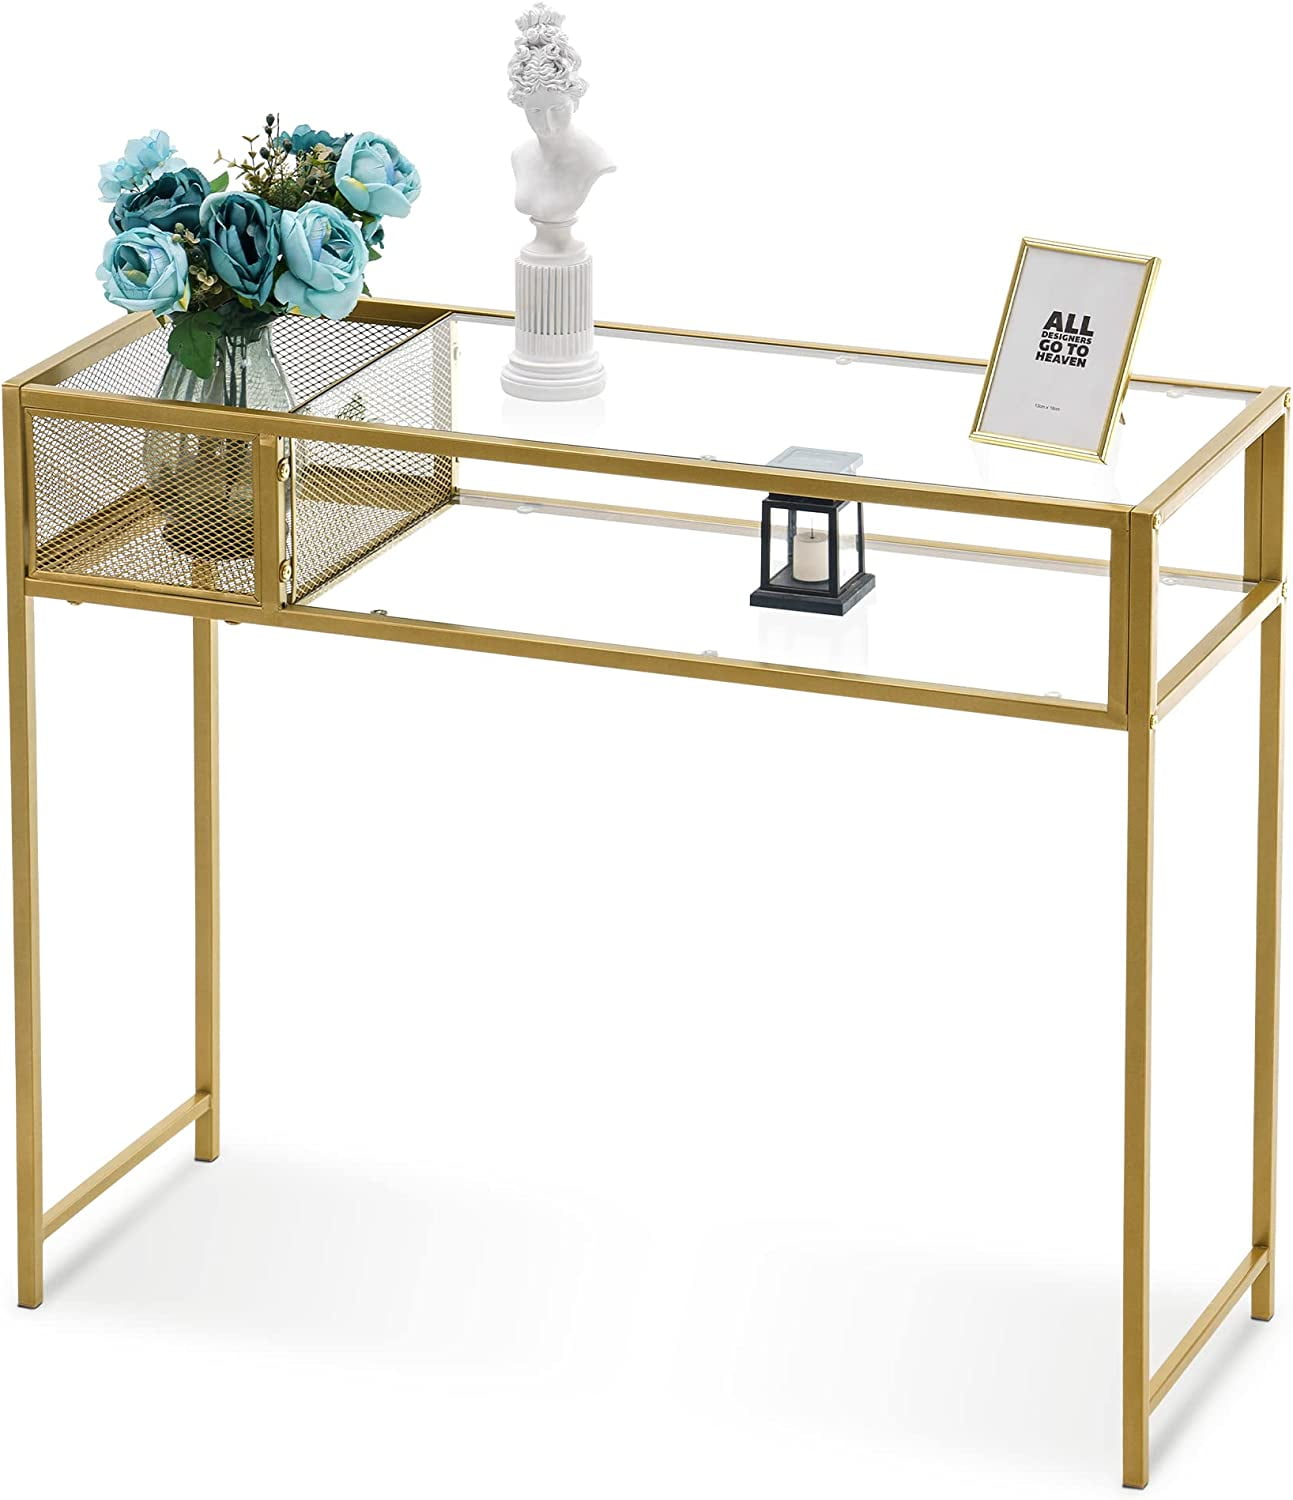 Ivinta Modern Narrow Glass Console Table,Small Dining Table Writing Desk, Computer Desk Entryway Table, Size: 43.25x15.75x29.26